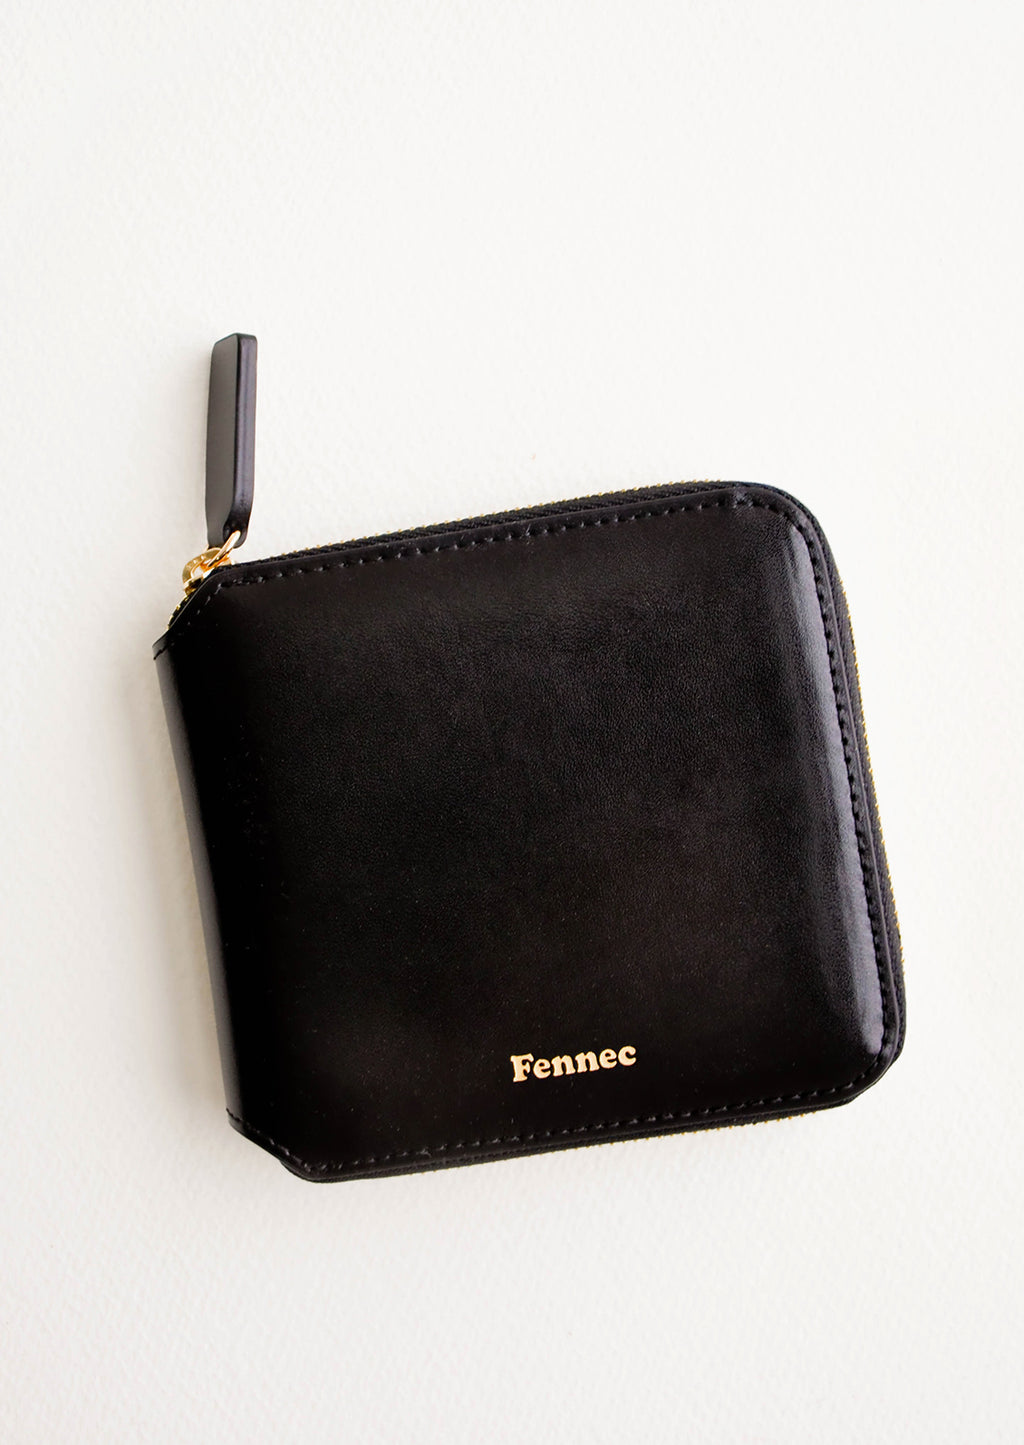 Black: Black leather wallet that zips on three sides, with matching tab pull.